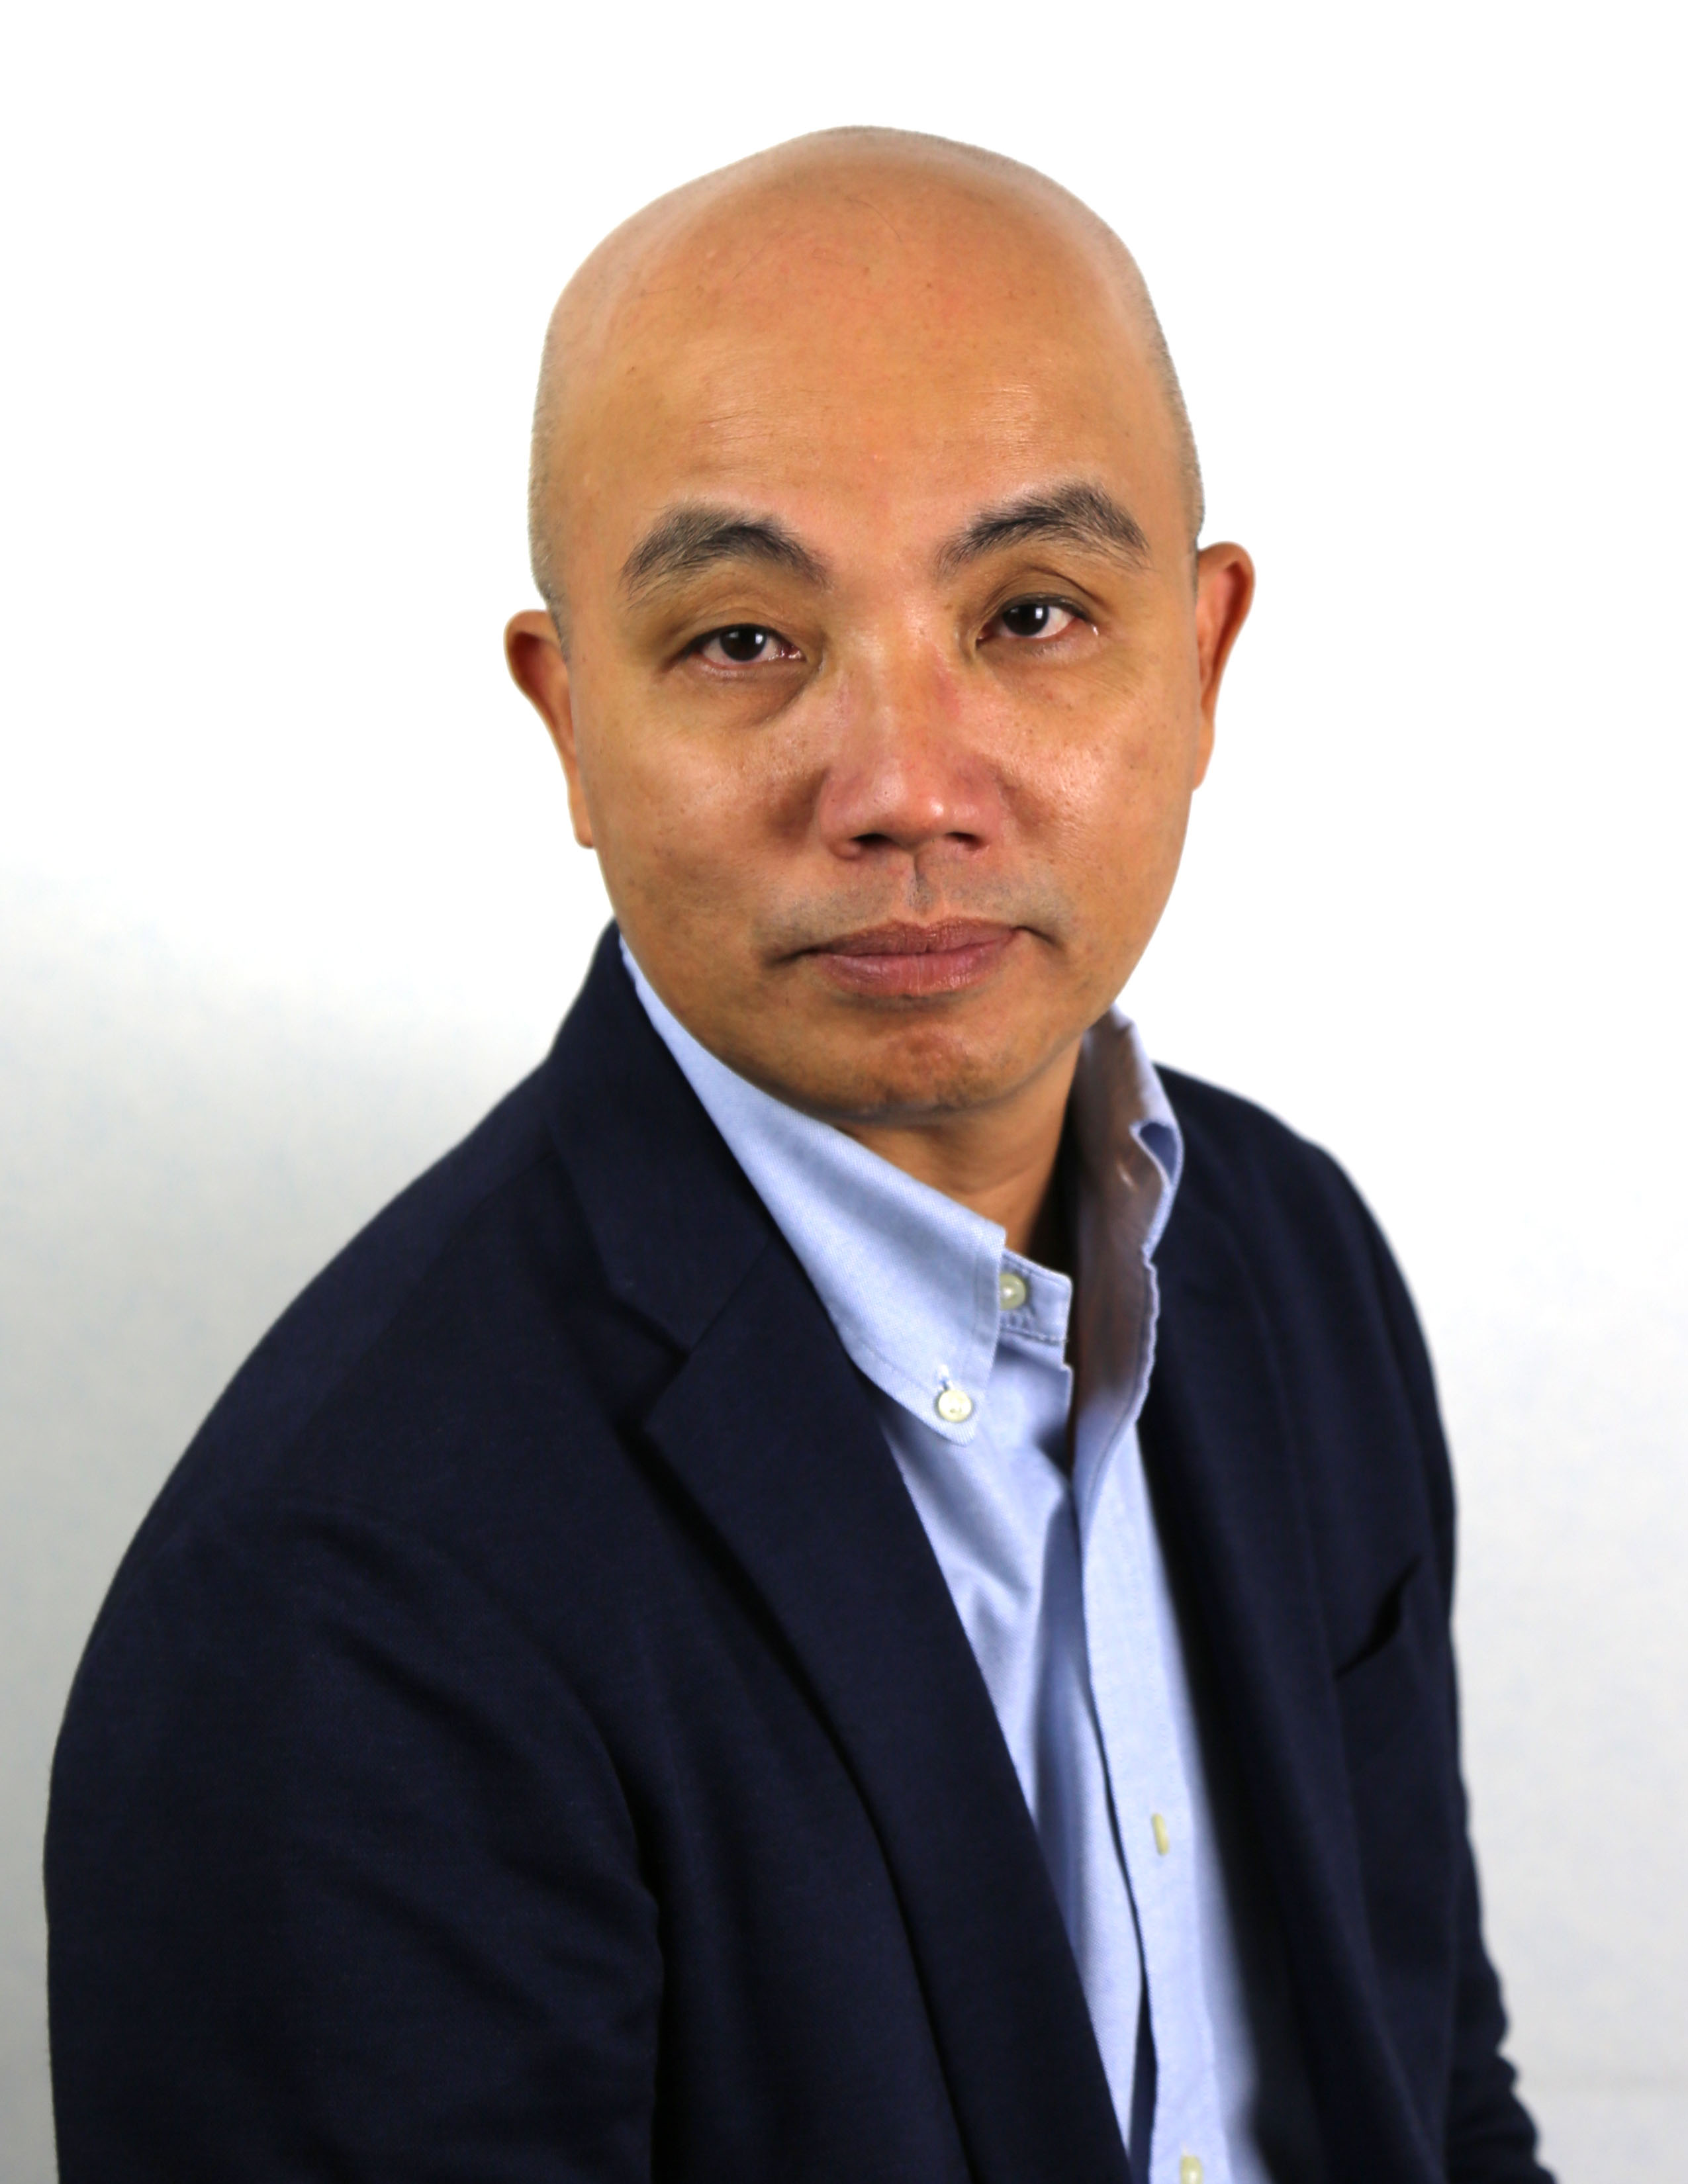 Kevin Tan as head of sales in Asia